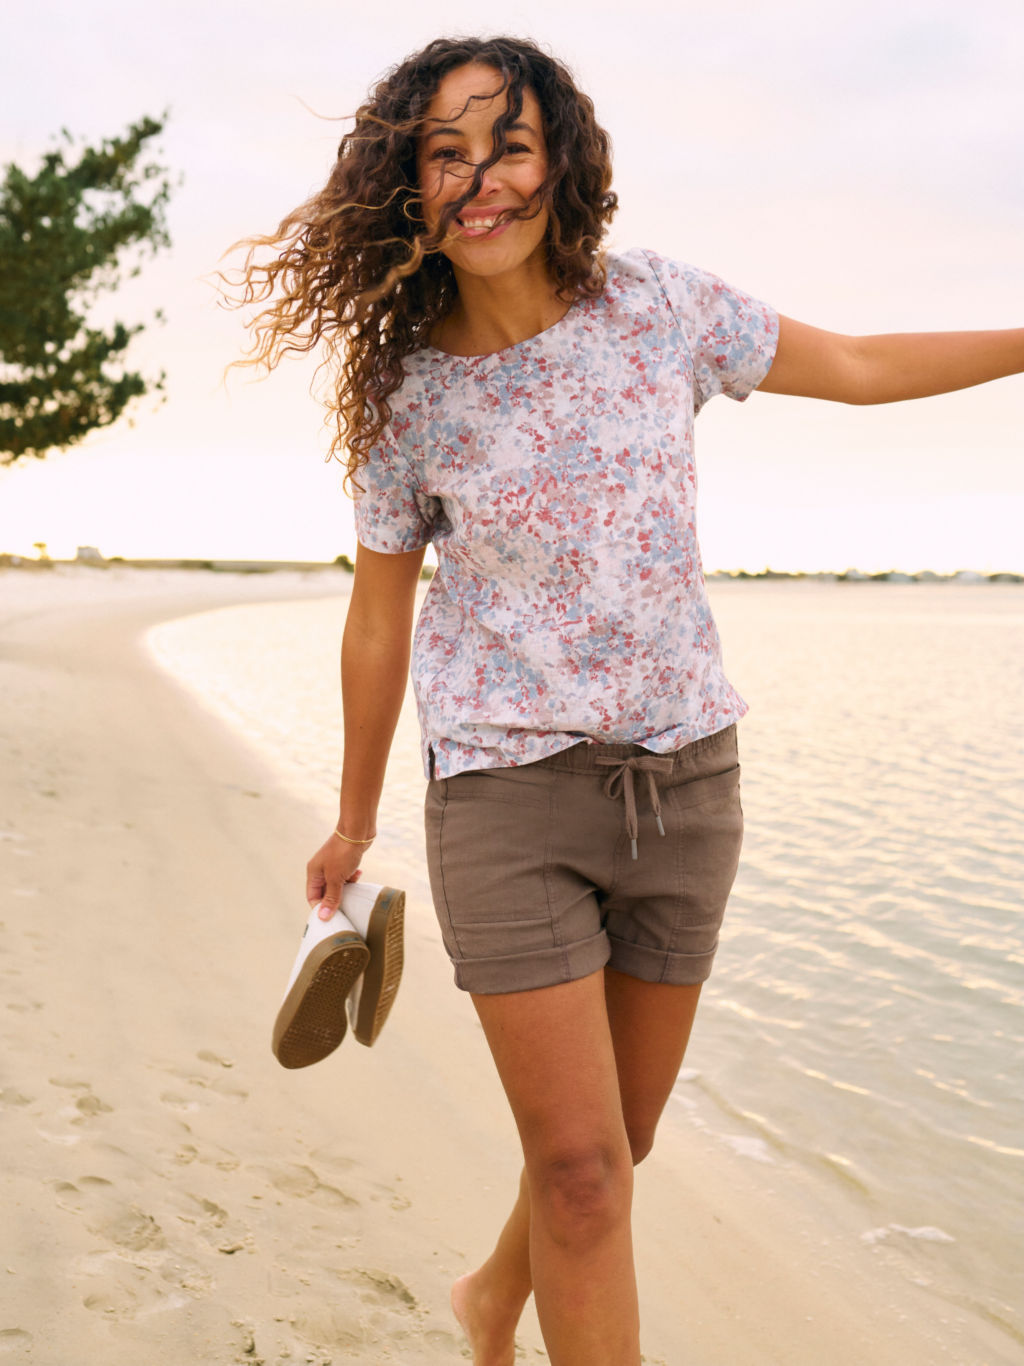 A model wearing a floral print linen t-shirt and brown colored shorts walks along the edge of the water on a sandy beach.